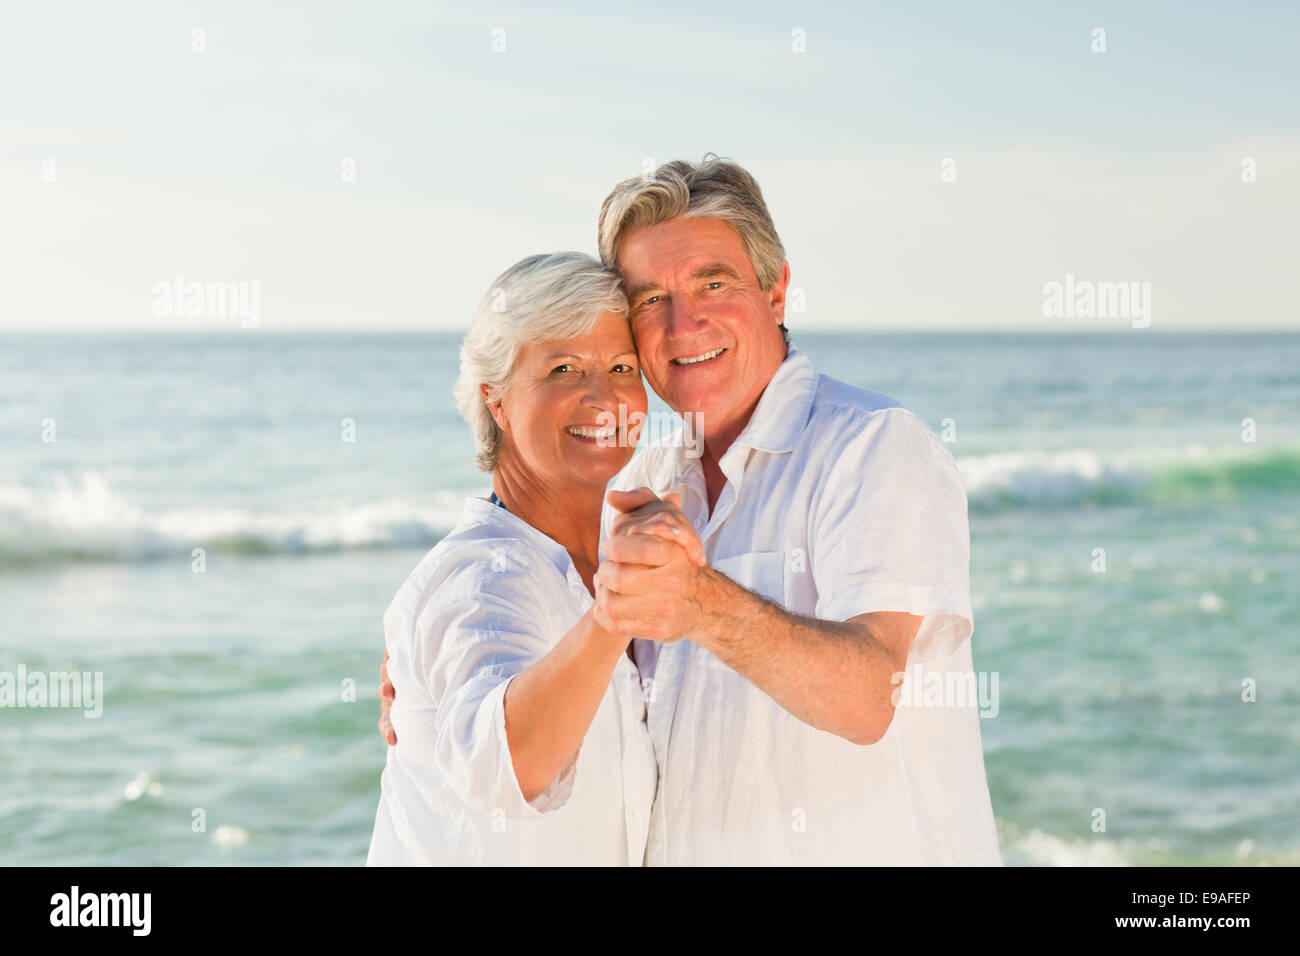 Young couple Dancing on the beach Banque D'Images